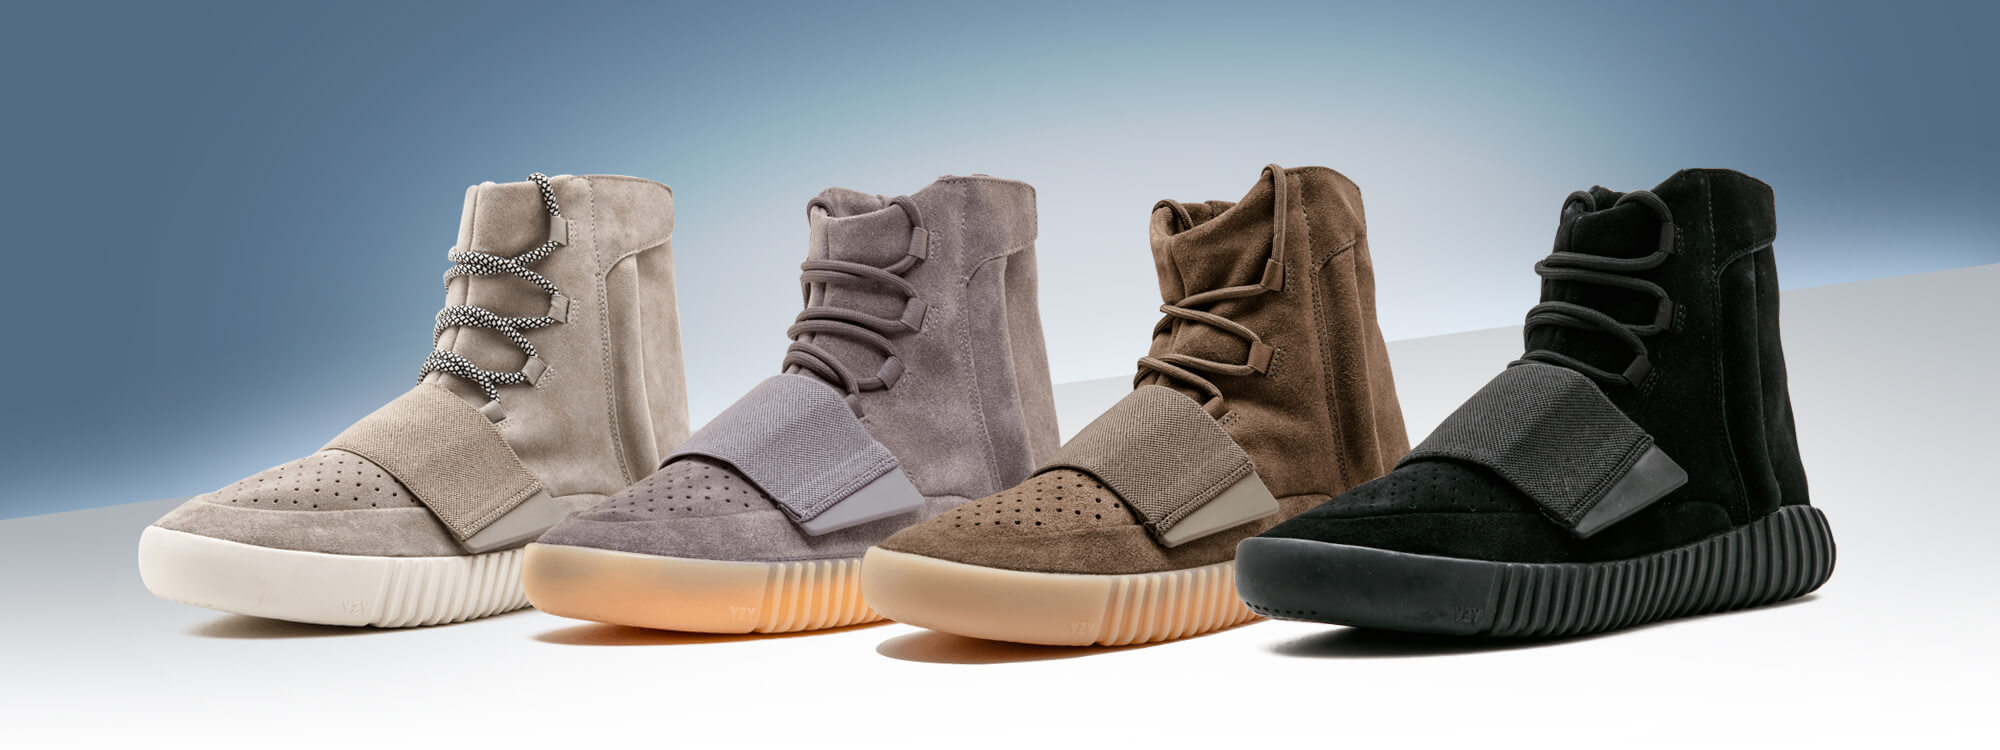 Perfect  Yeezy Boost 750  shoes